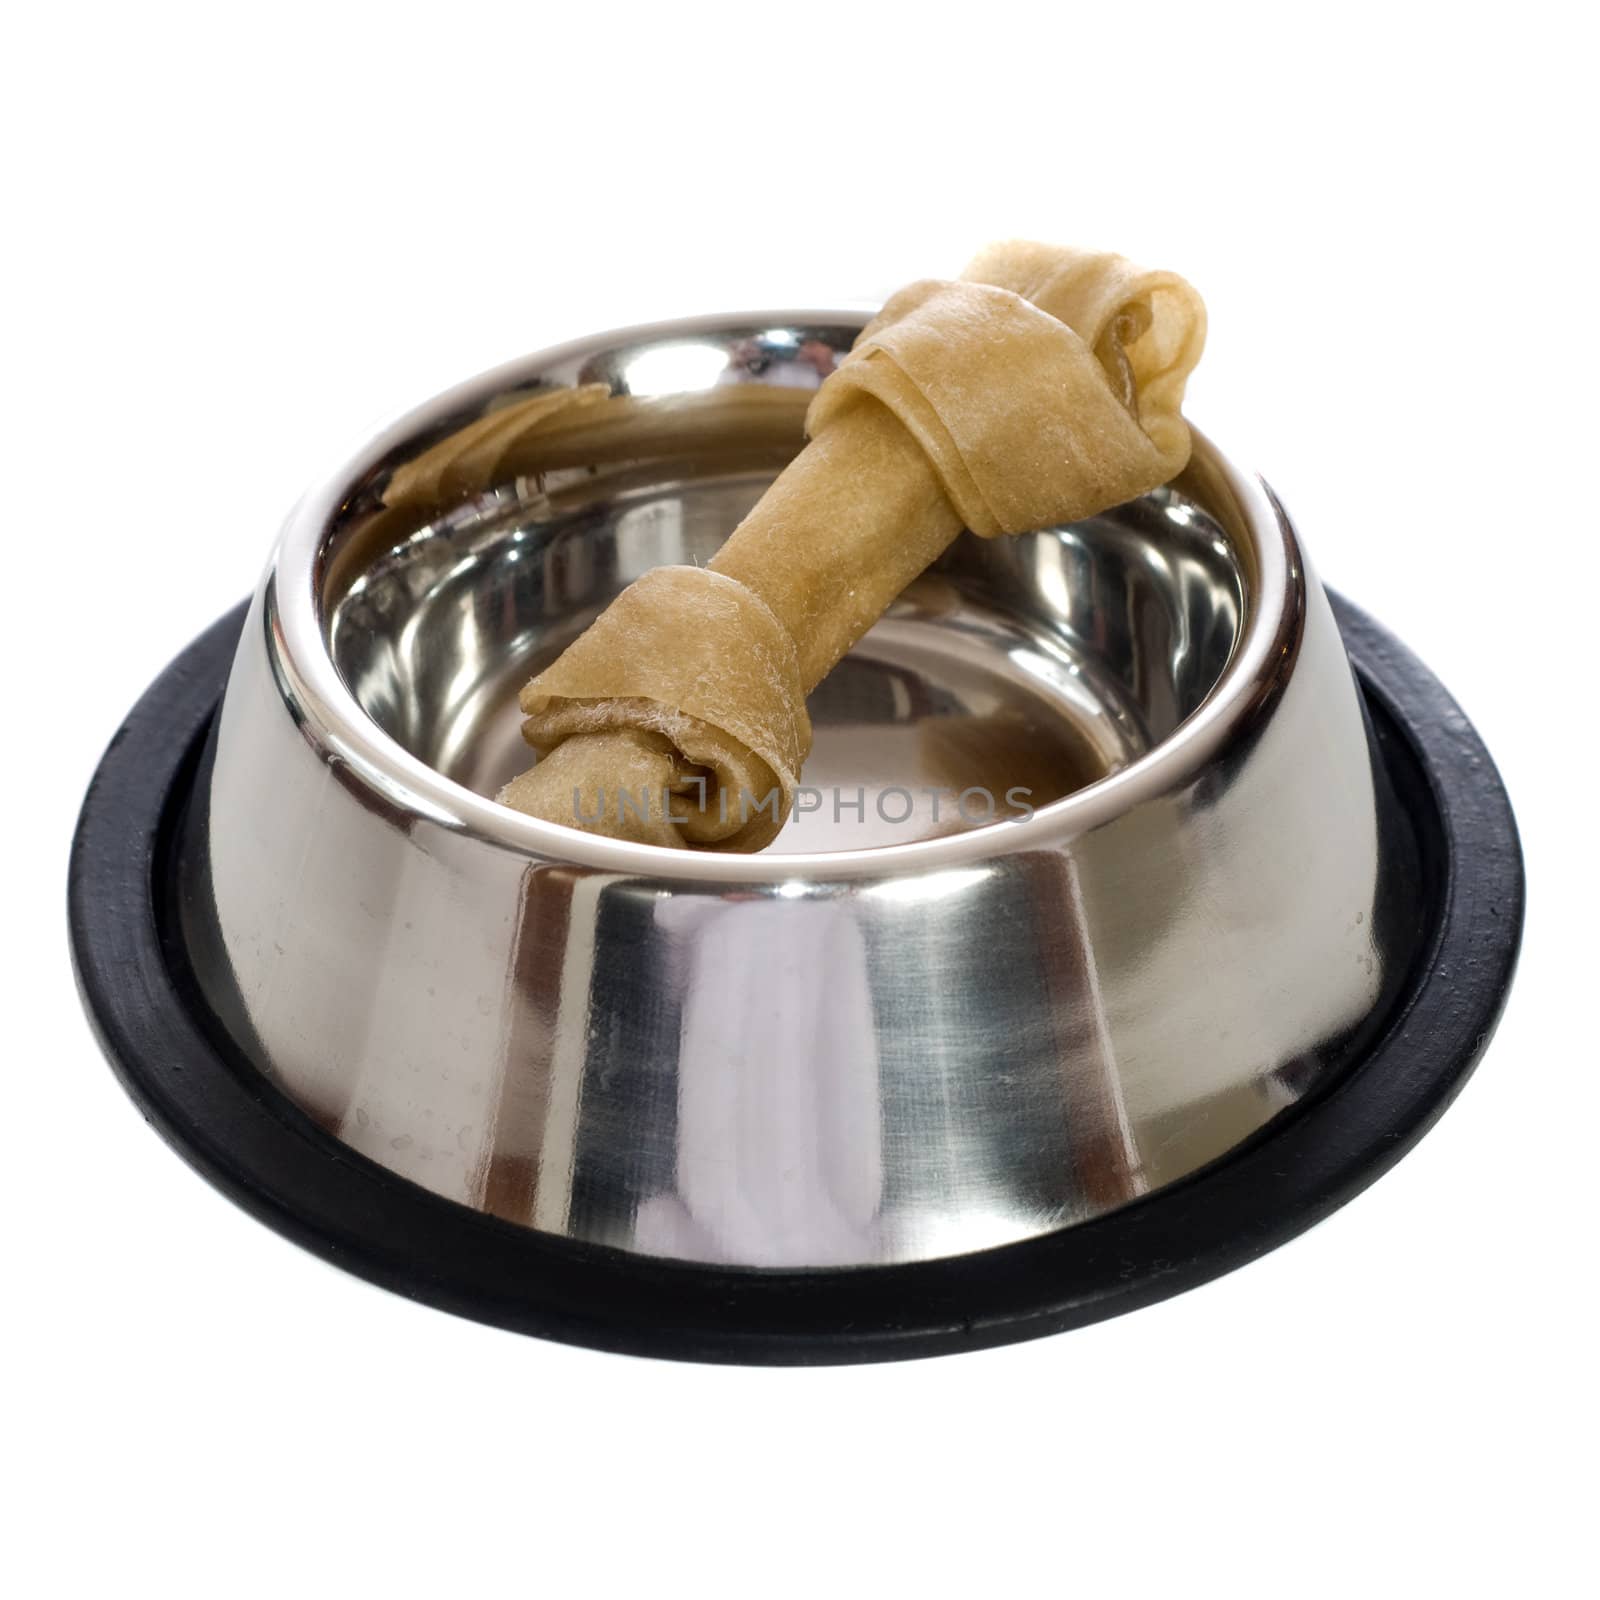 A rawhide dog bone in a metal dish, isolated against a white background